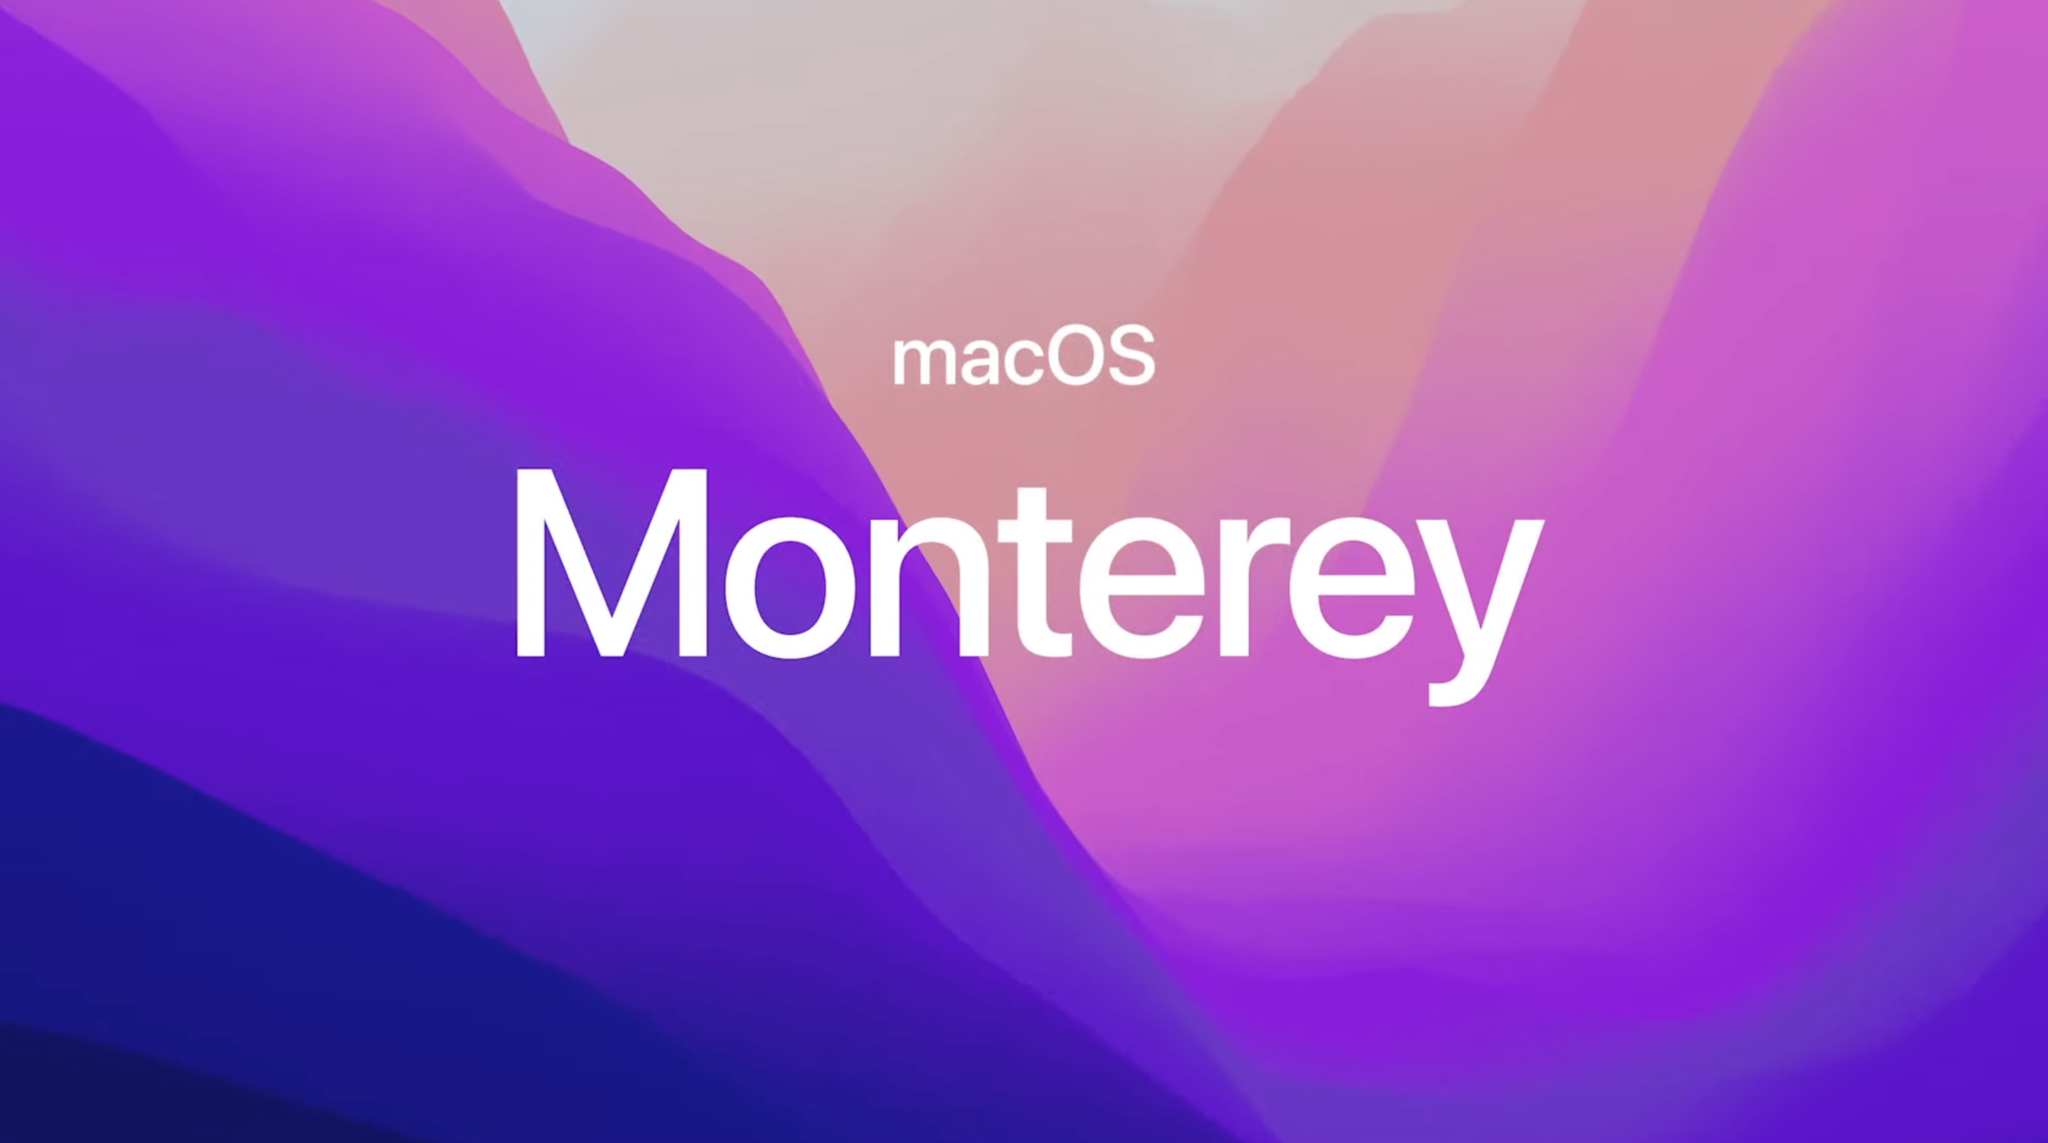 macOS 12 Monterey release date, features and everything you need to